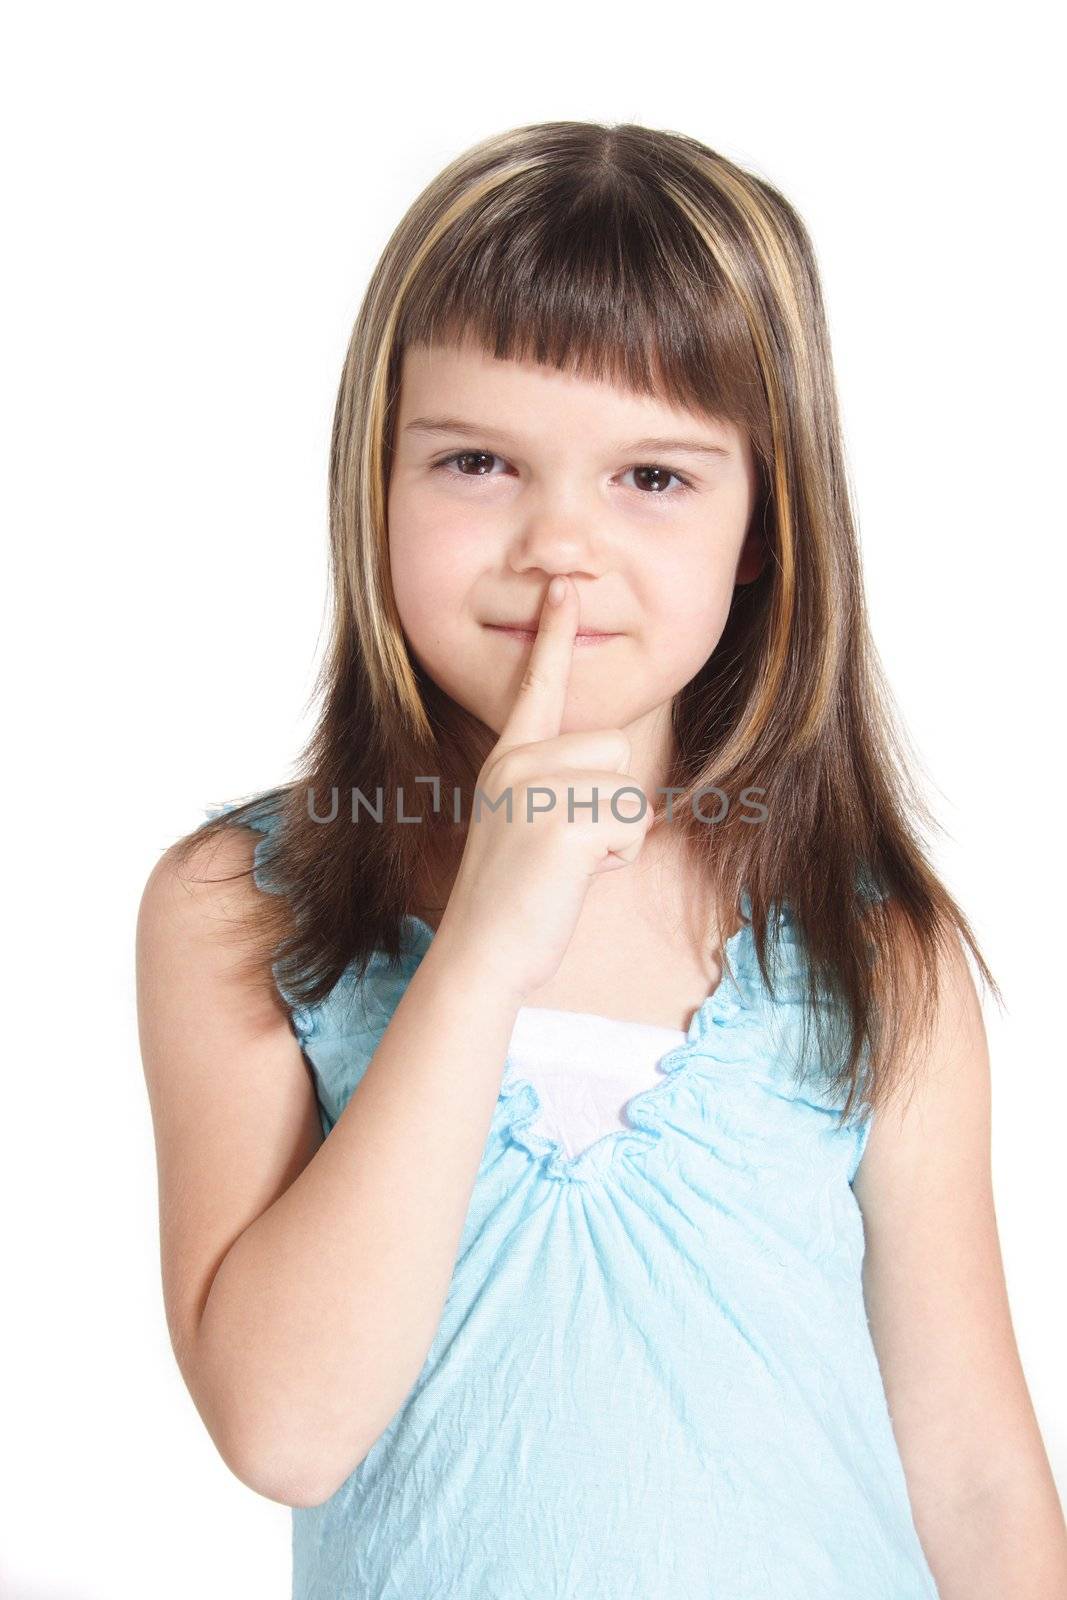 A young girl requests silence. All  isolated on white background.